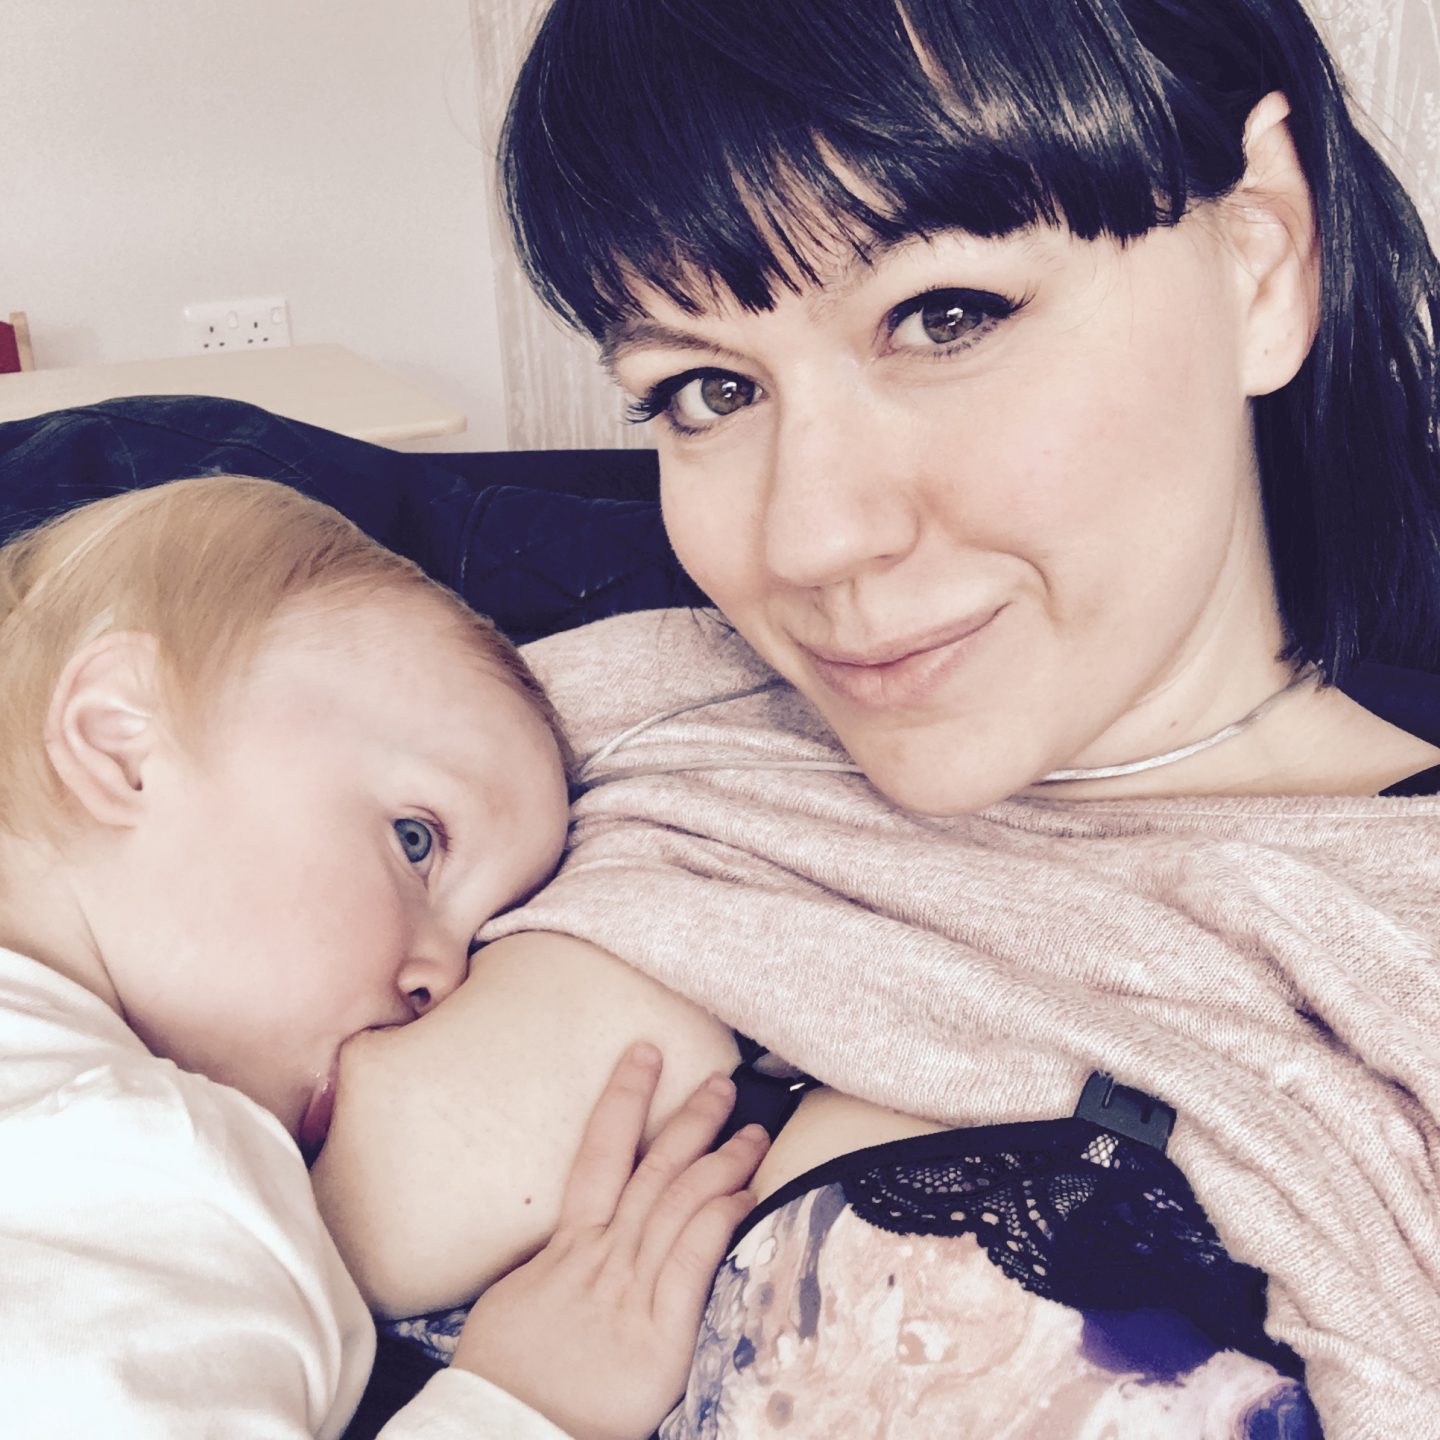 An open letter to those who have supported me breastfeeding...